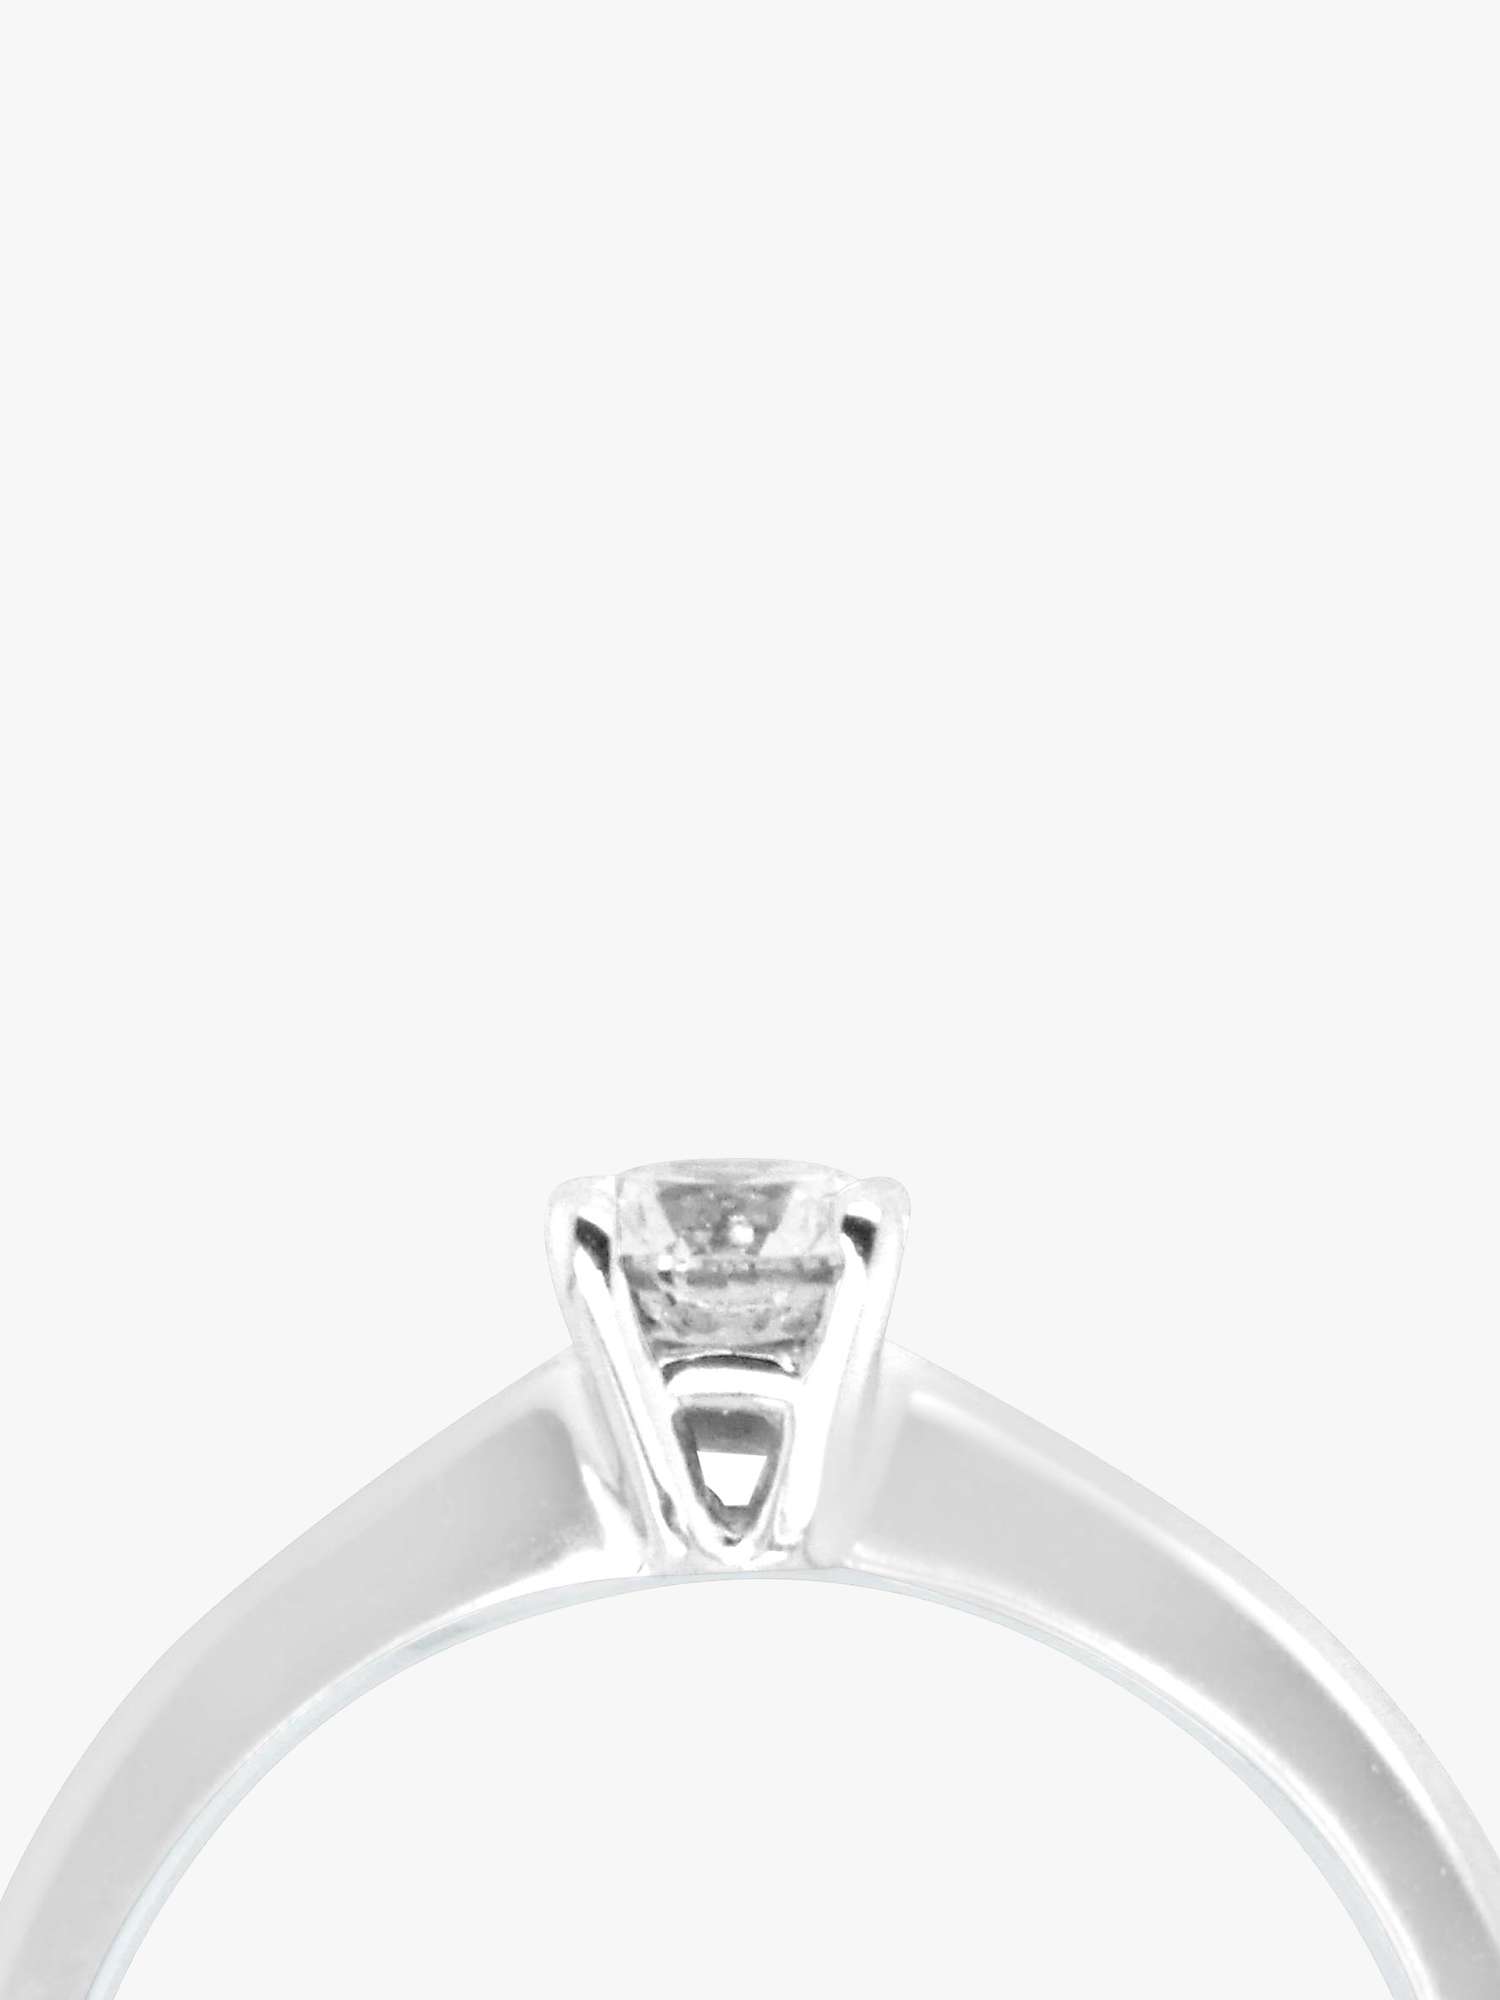 Buy Milton & Humble Jewellery Second Hand 18ct White Gold Solitaire Diamond Ring, Dated 2015 Online at johnlewis.com